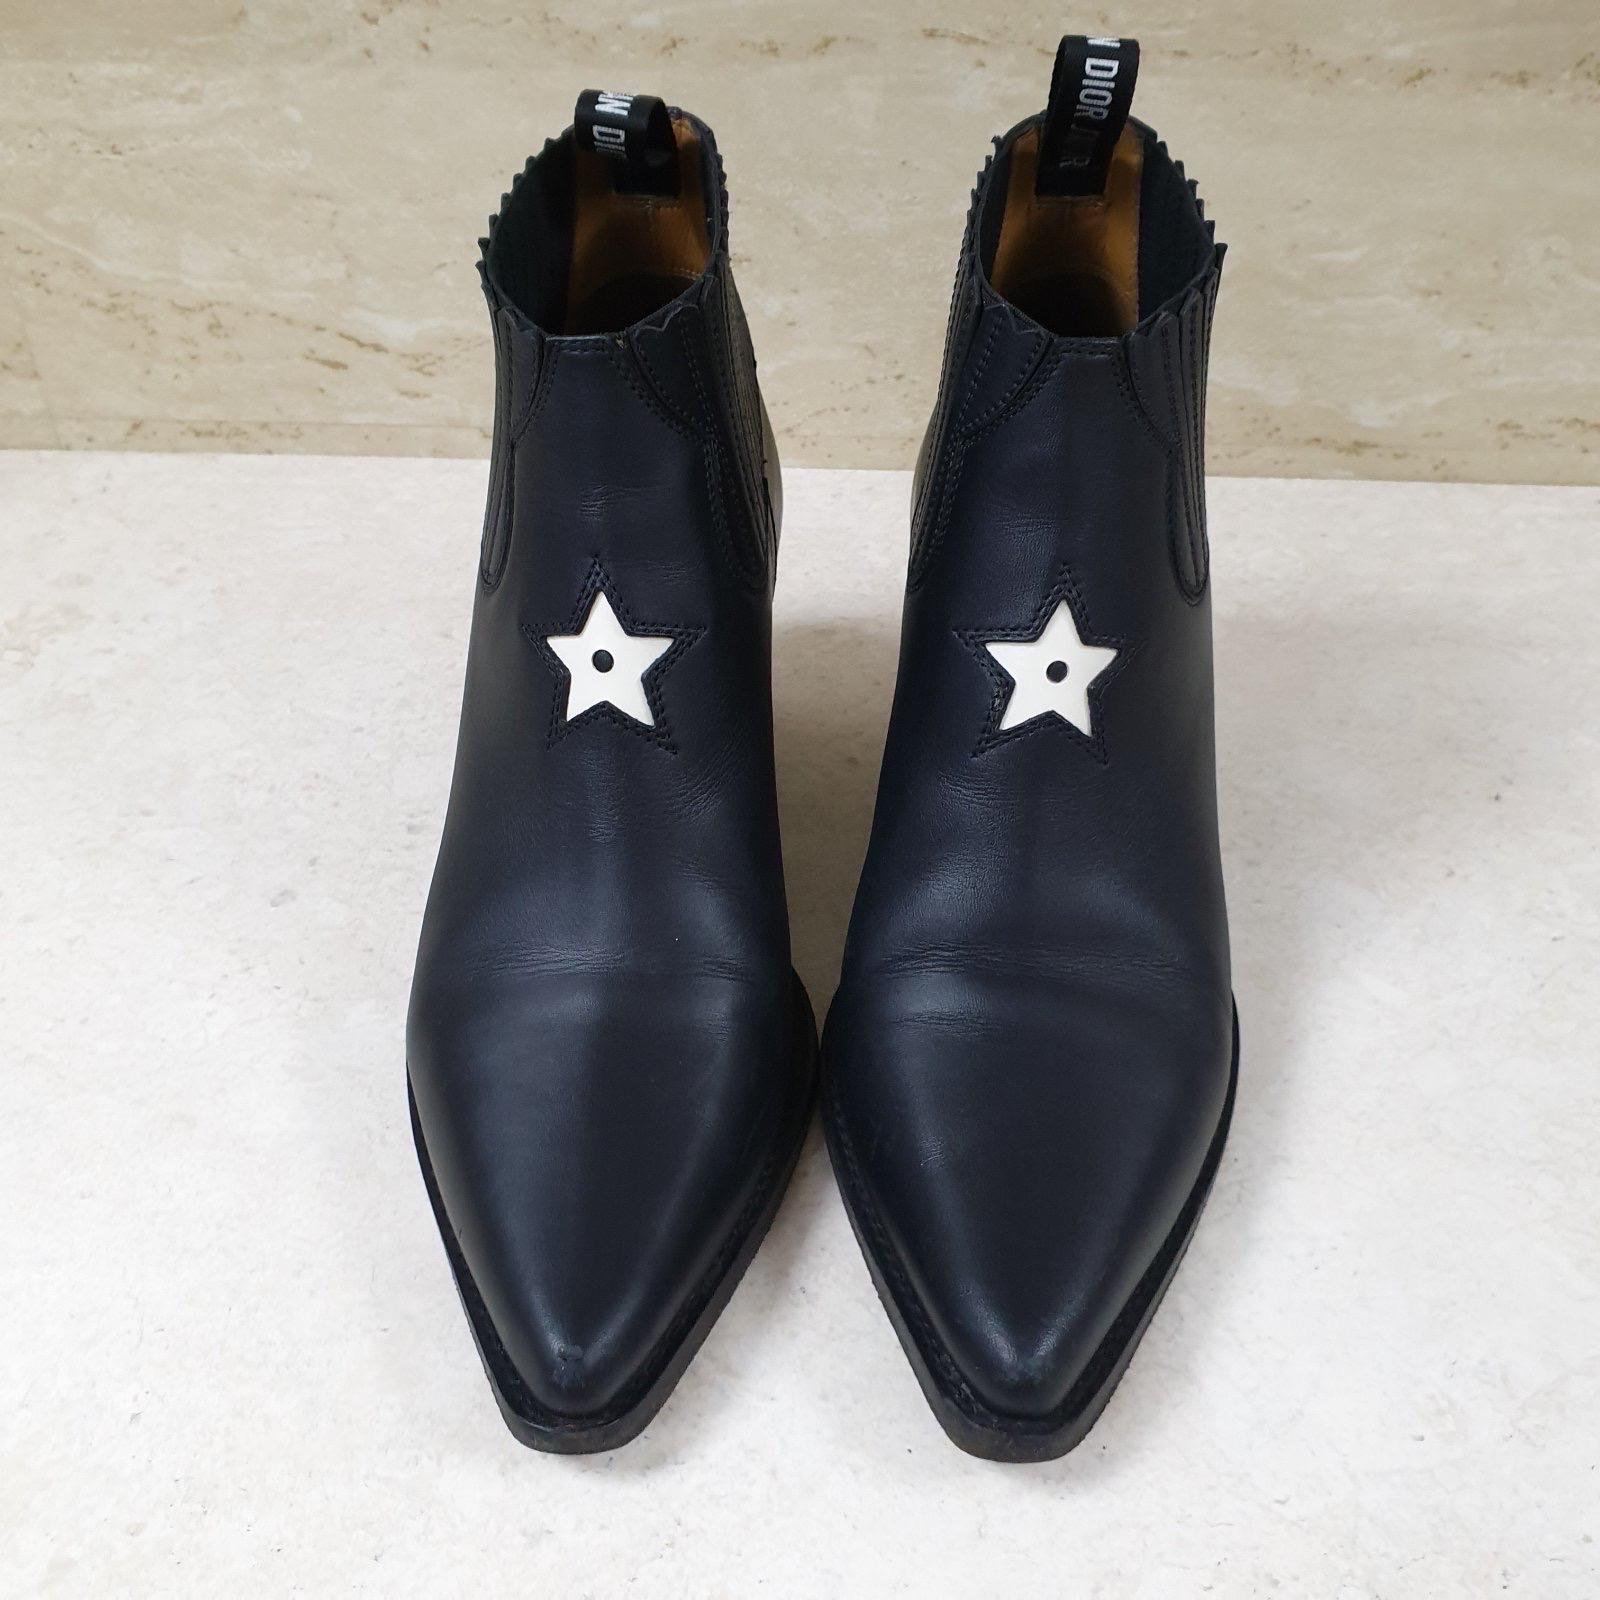 CHRISTIAN DIOR Star Leather Western Boots In Good Condition For Sale In Krakow, PL